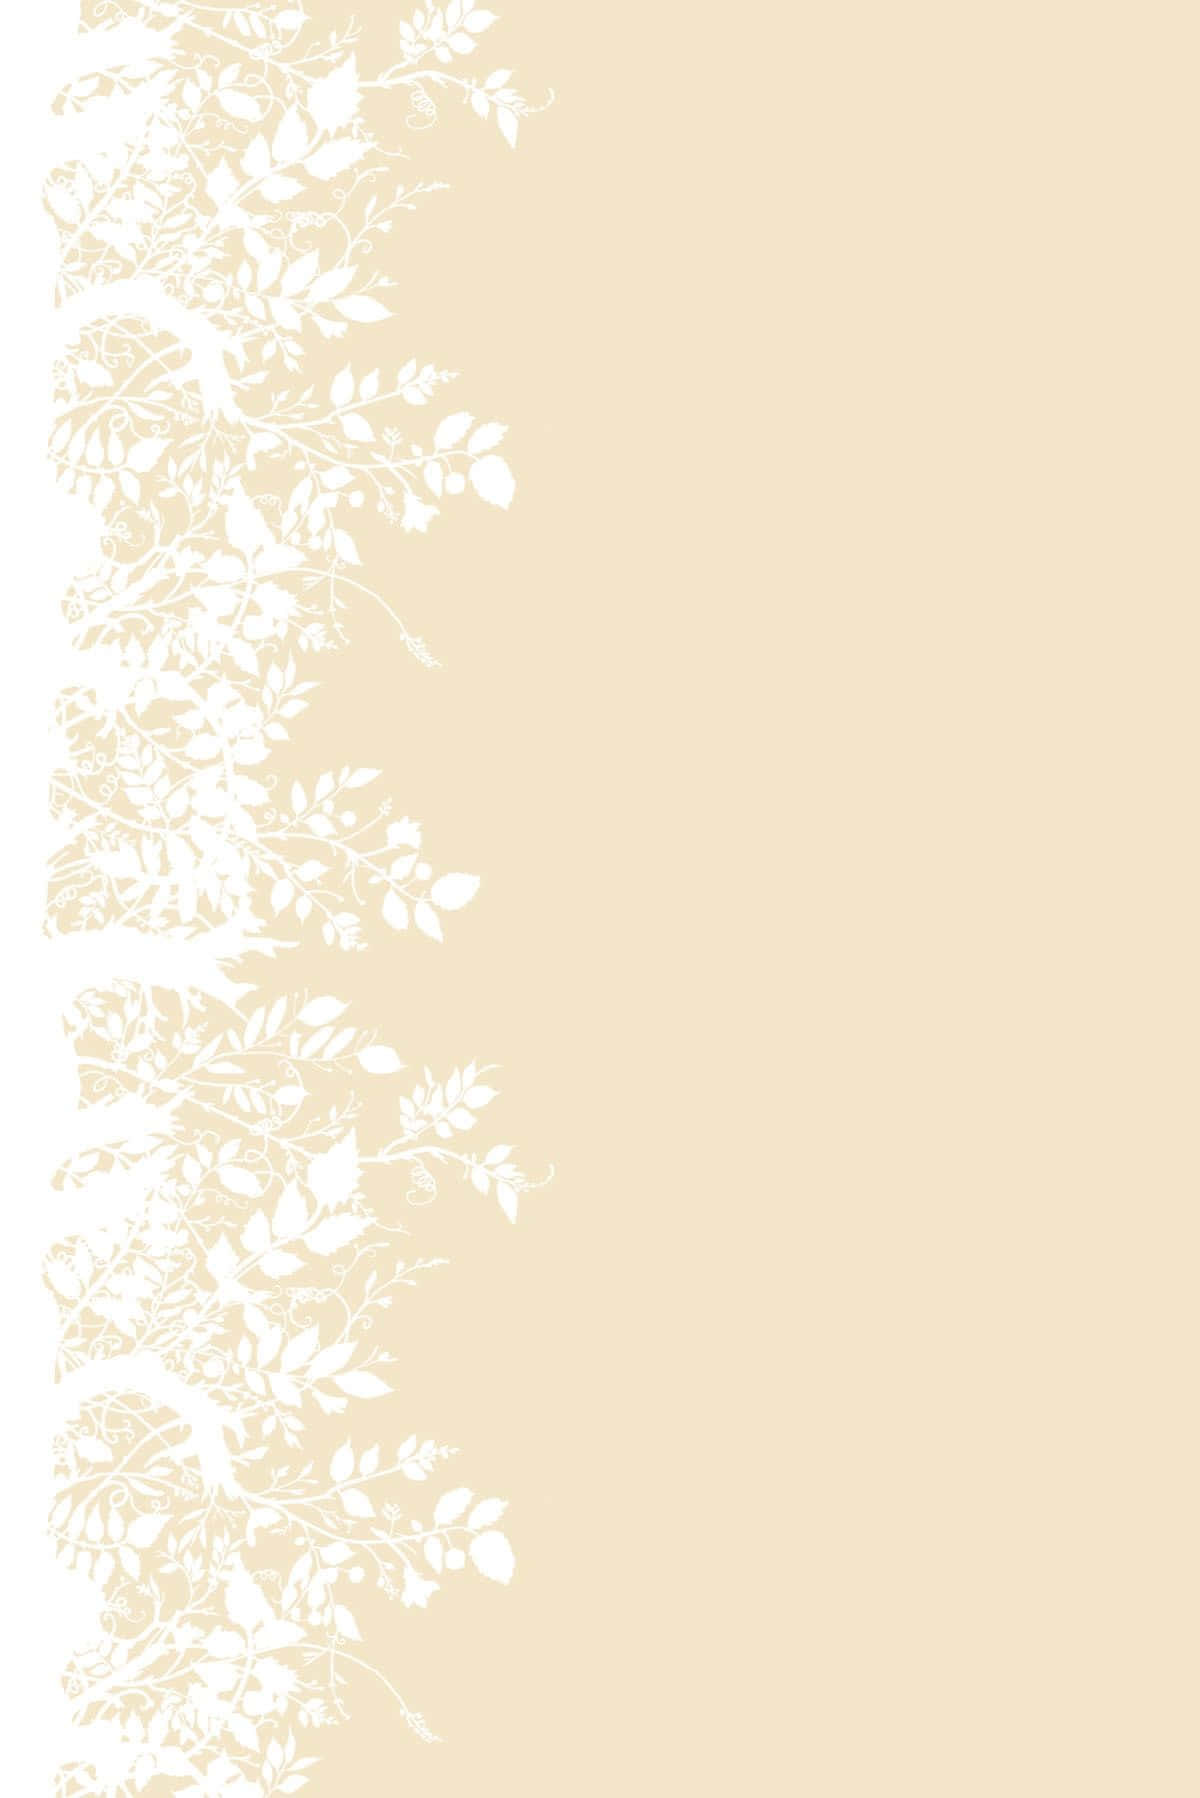 Cream Color Background White Leaves